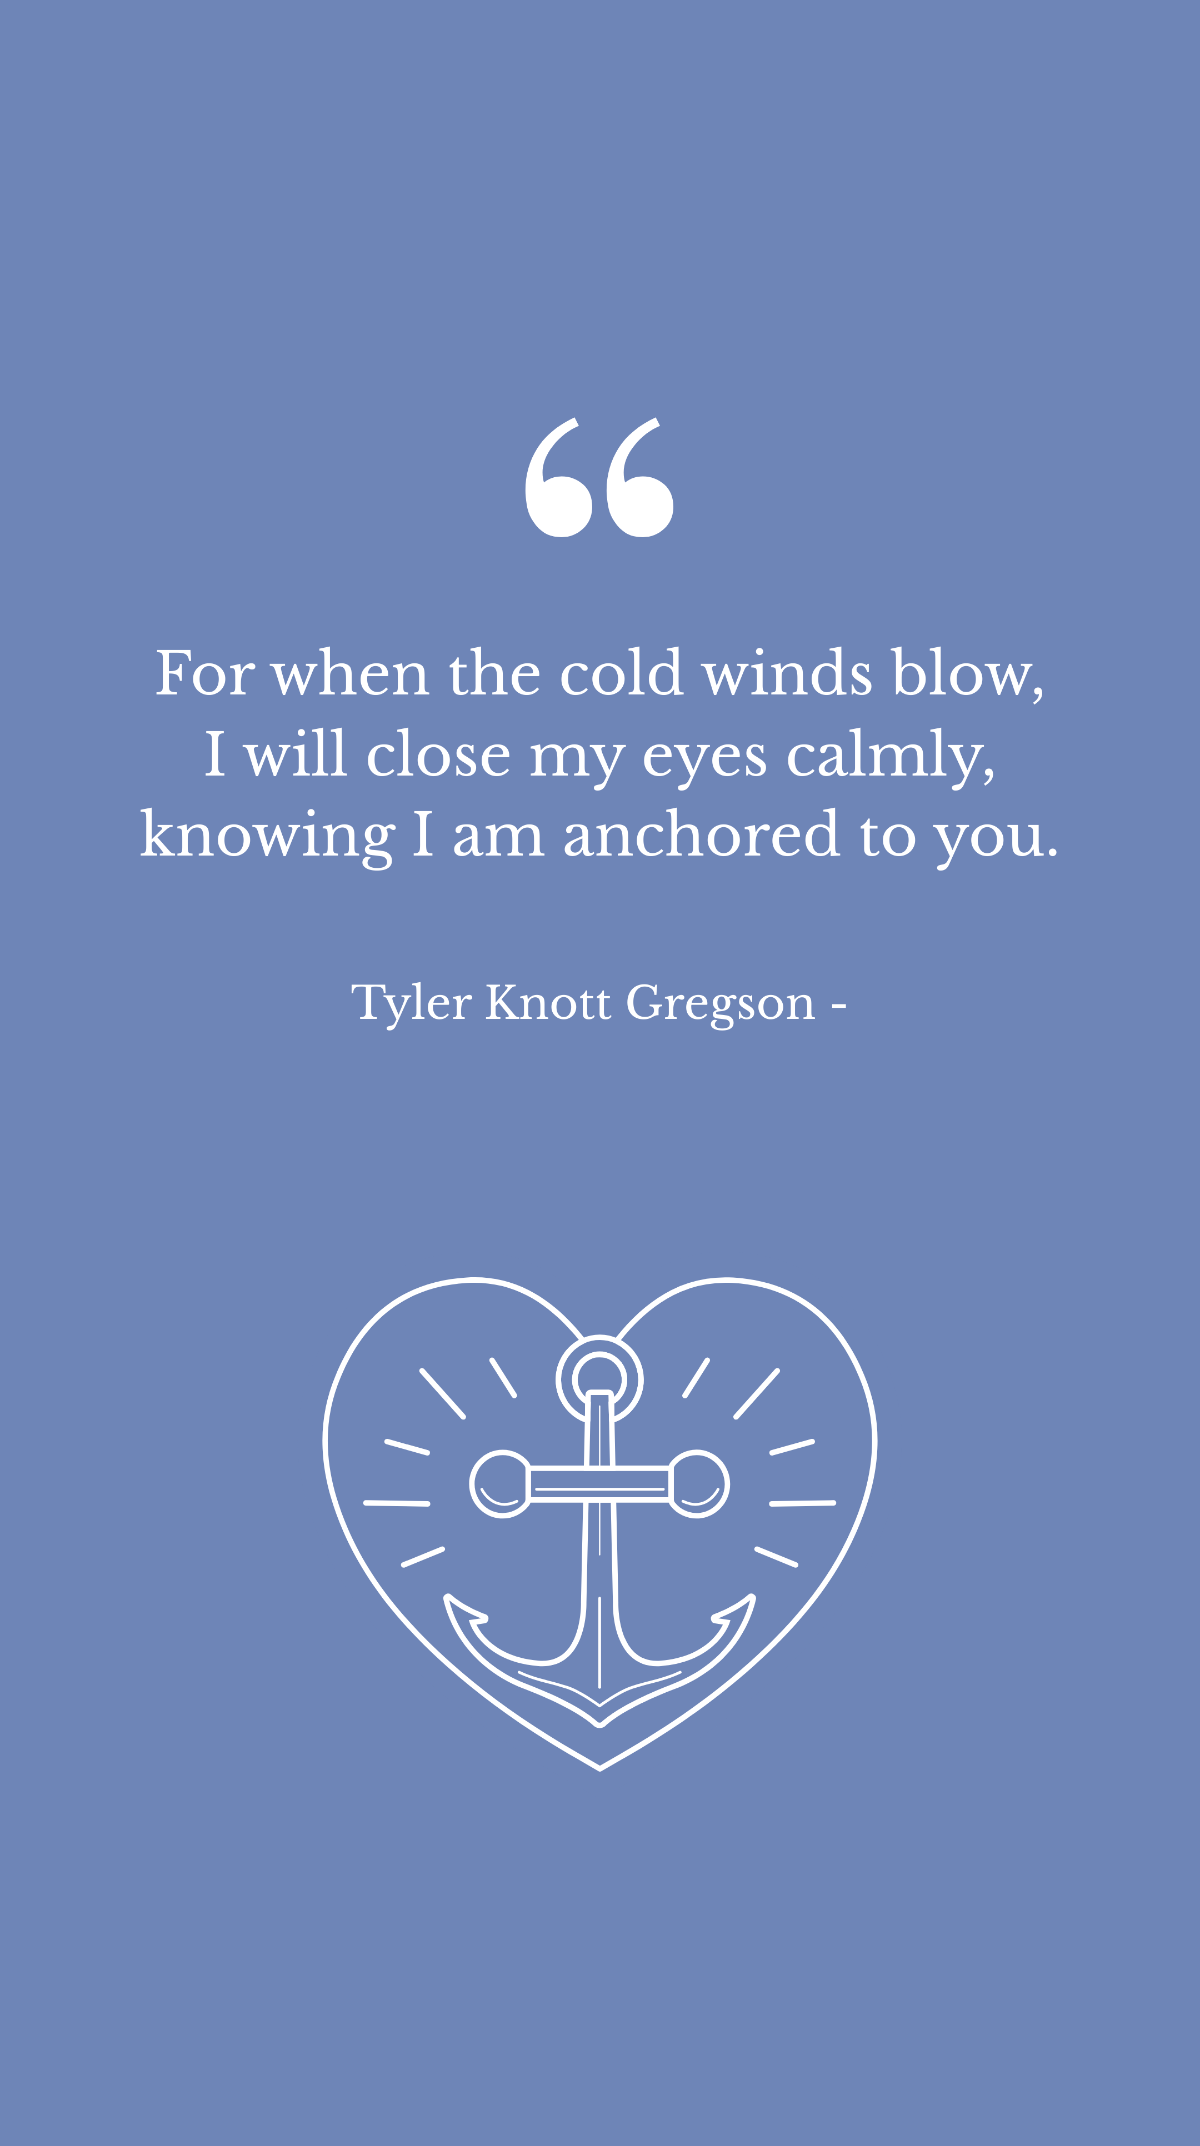 Tyler Knott Gregson - For when the cold winds blow, I will close my eyes calmly, knowing I am anchored to you.